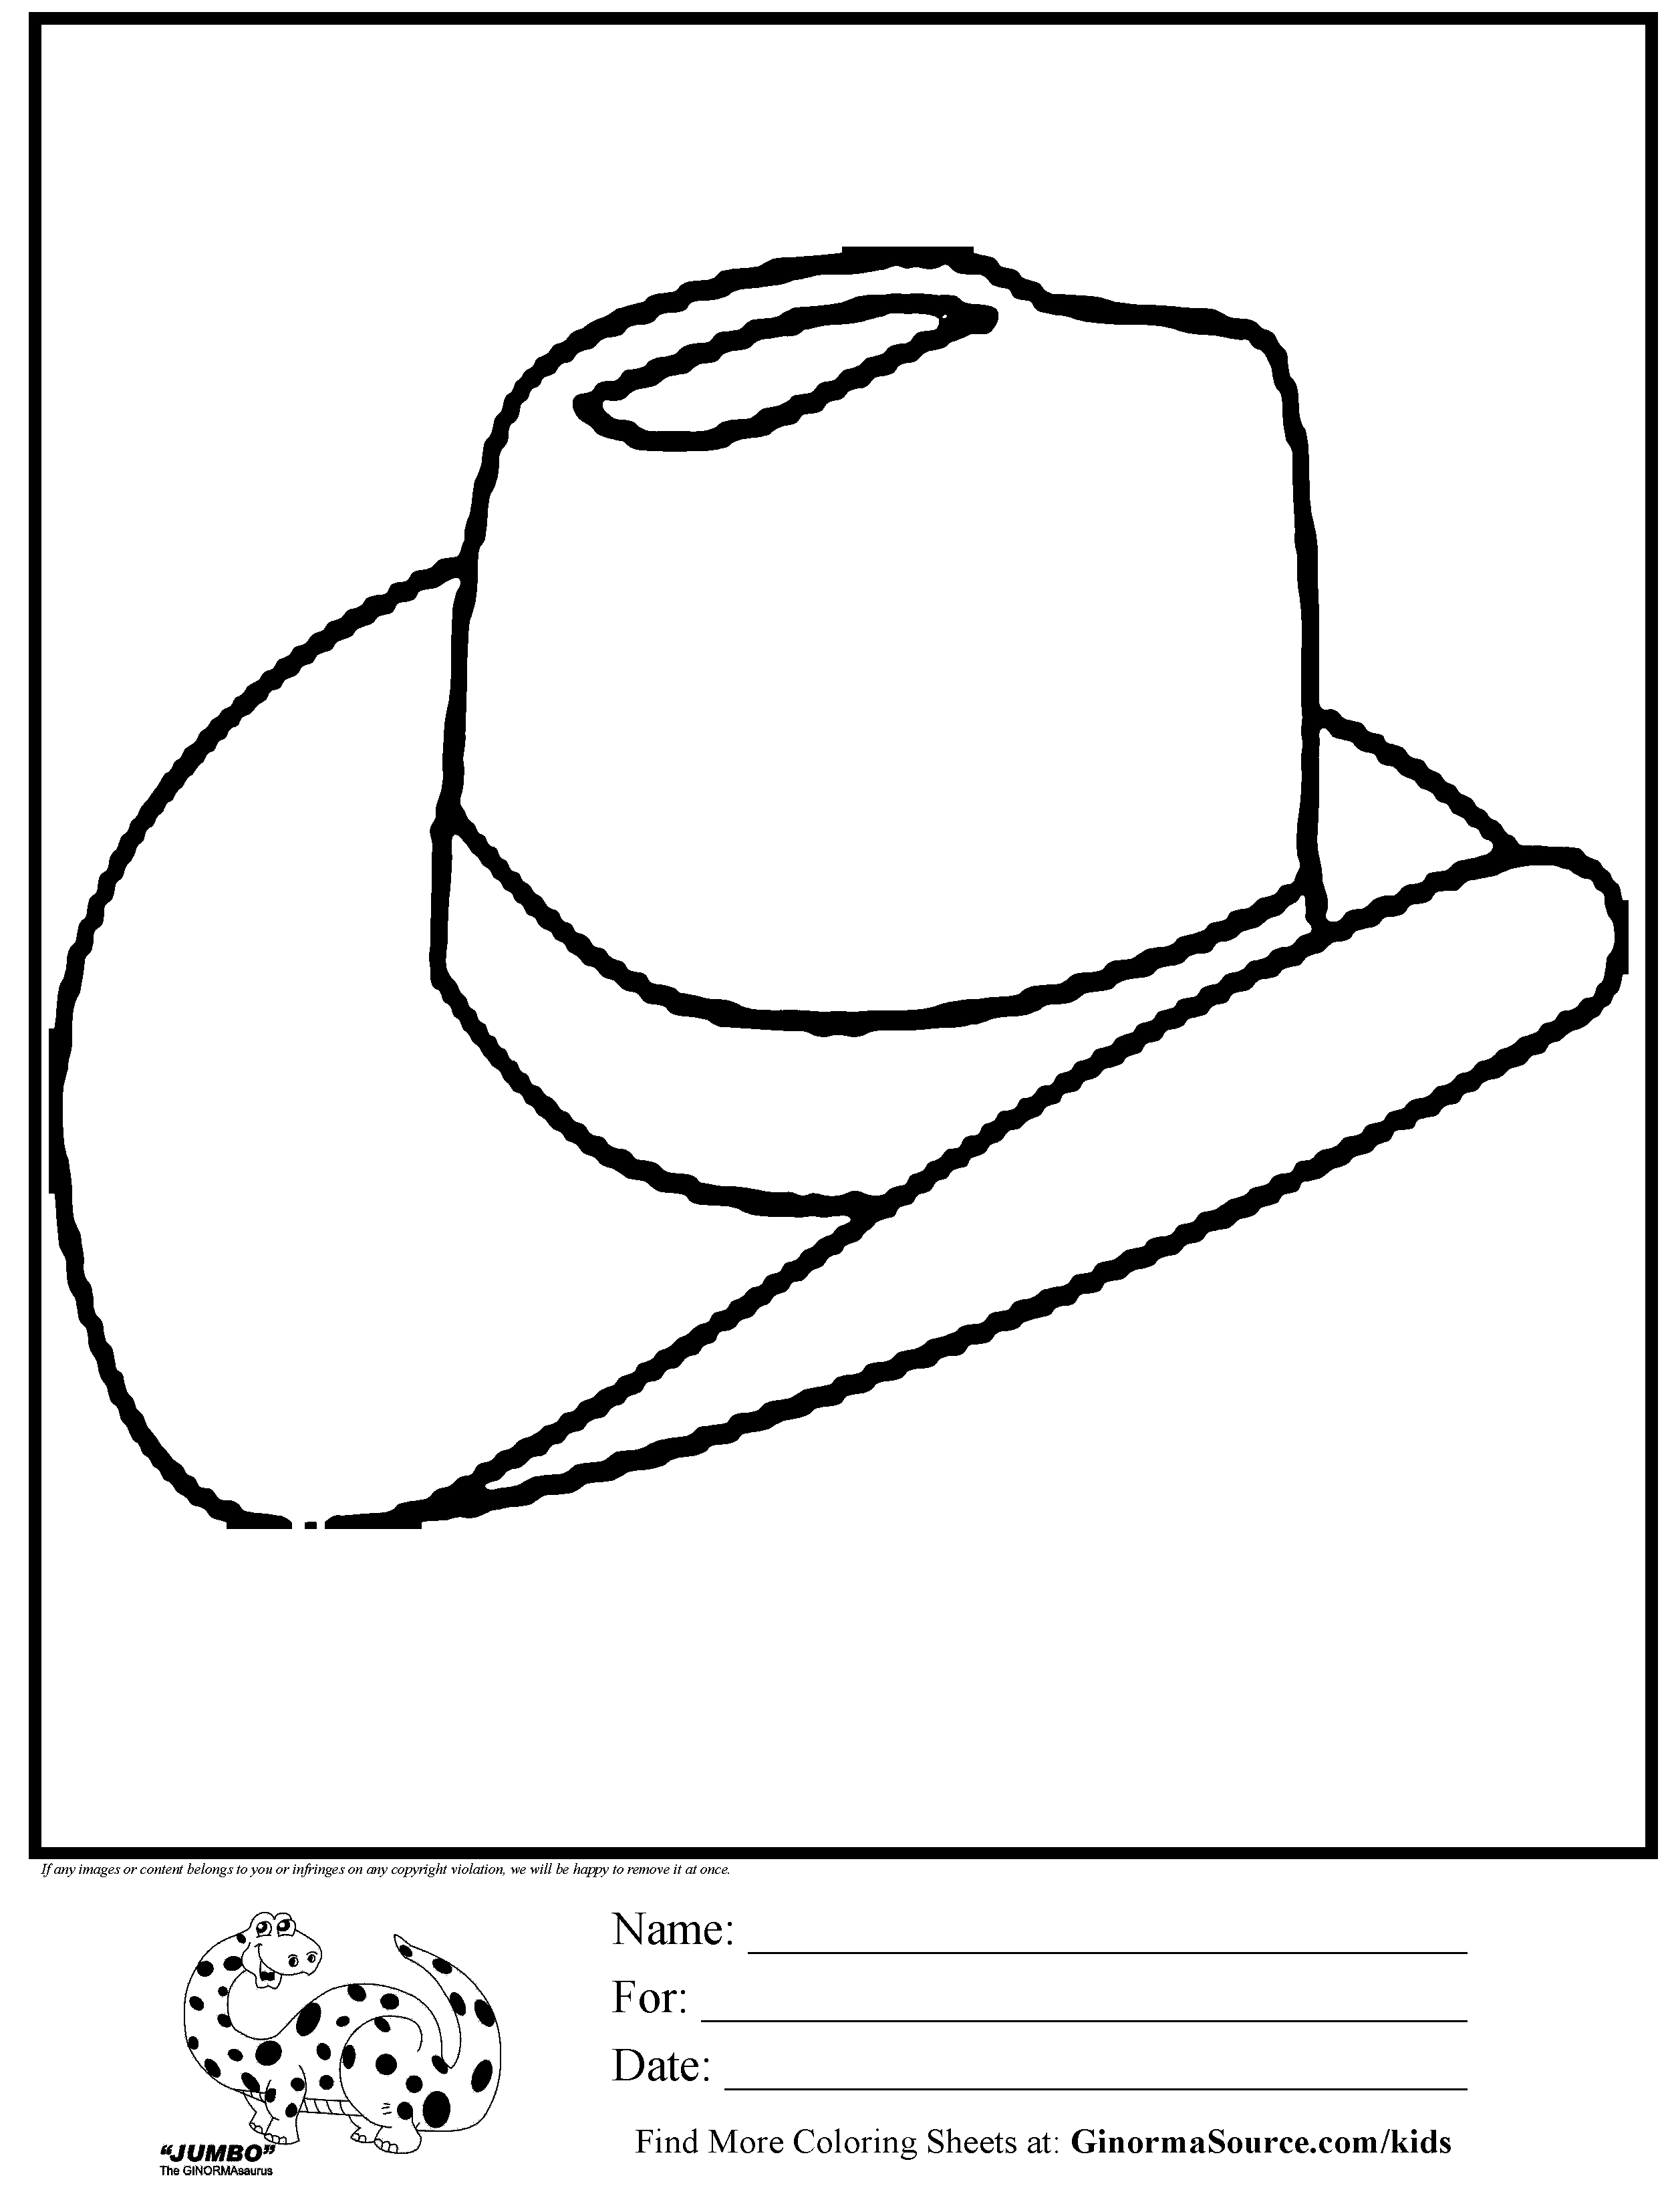 Cowboy Hat Coloring Pages Coloring Page Cowboy Hat Ginormasource Kids